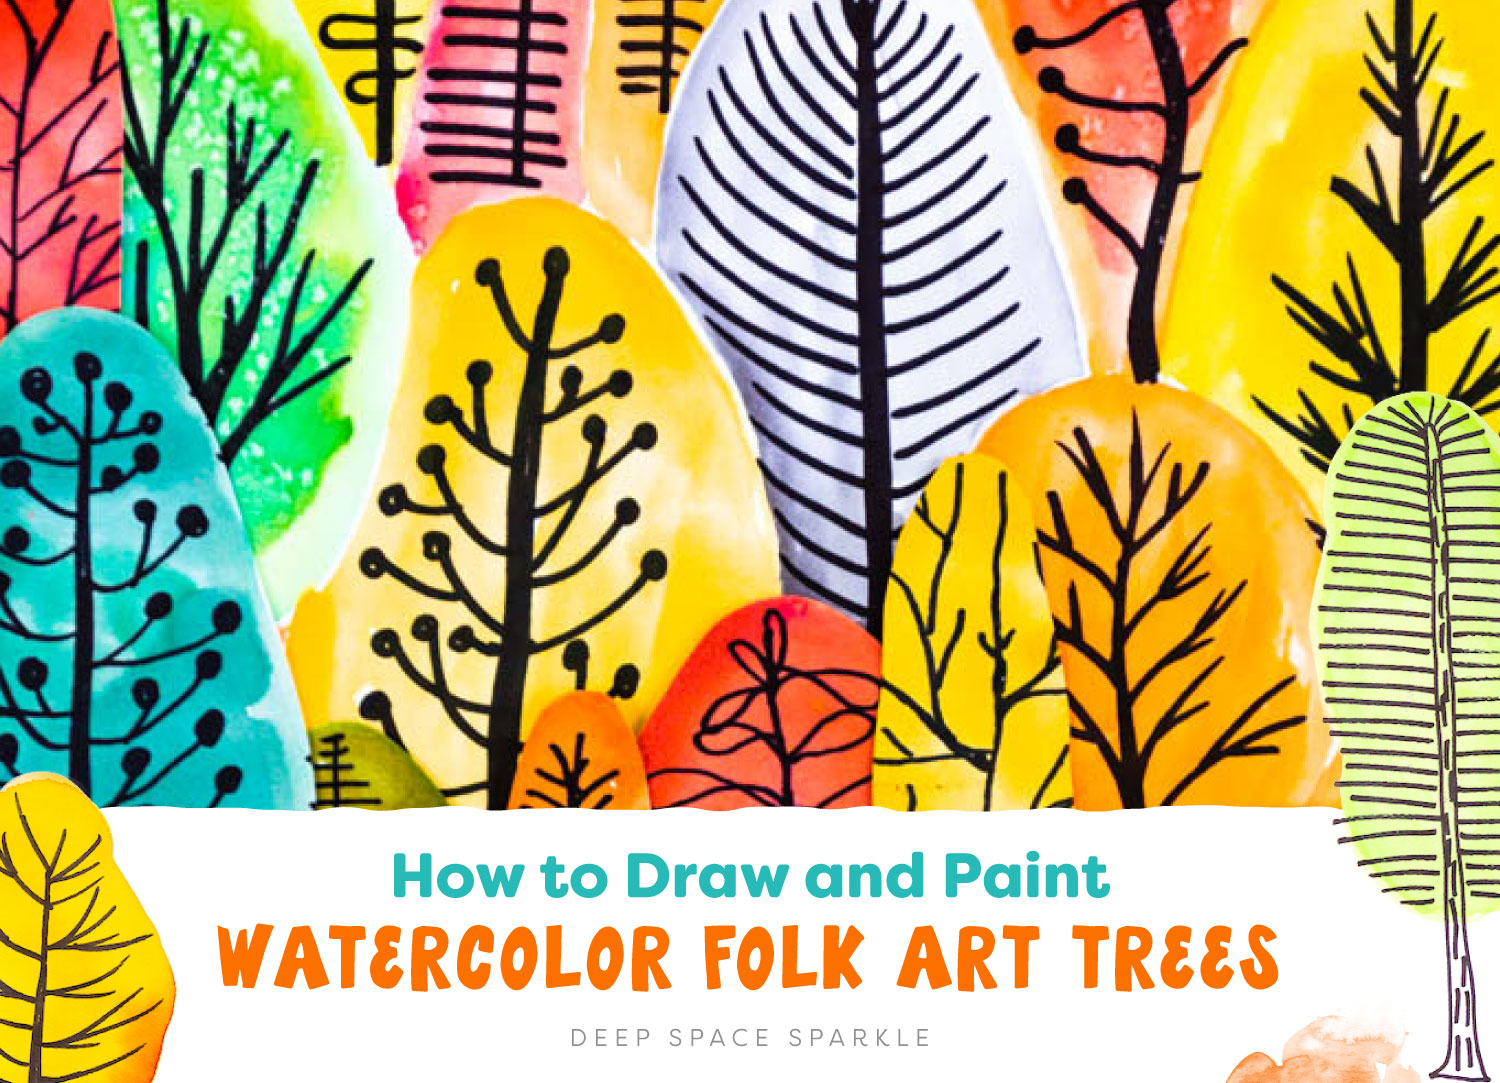 https://www.deepspacesparkle.com/wp-content/uploads/2019/10/Feature-How-to-Draw-and-Paint-Watercolor-Folk-Art-Trees.jpg